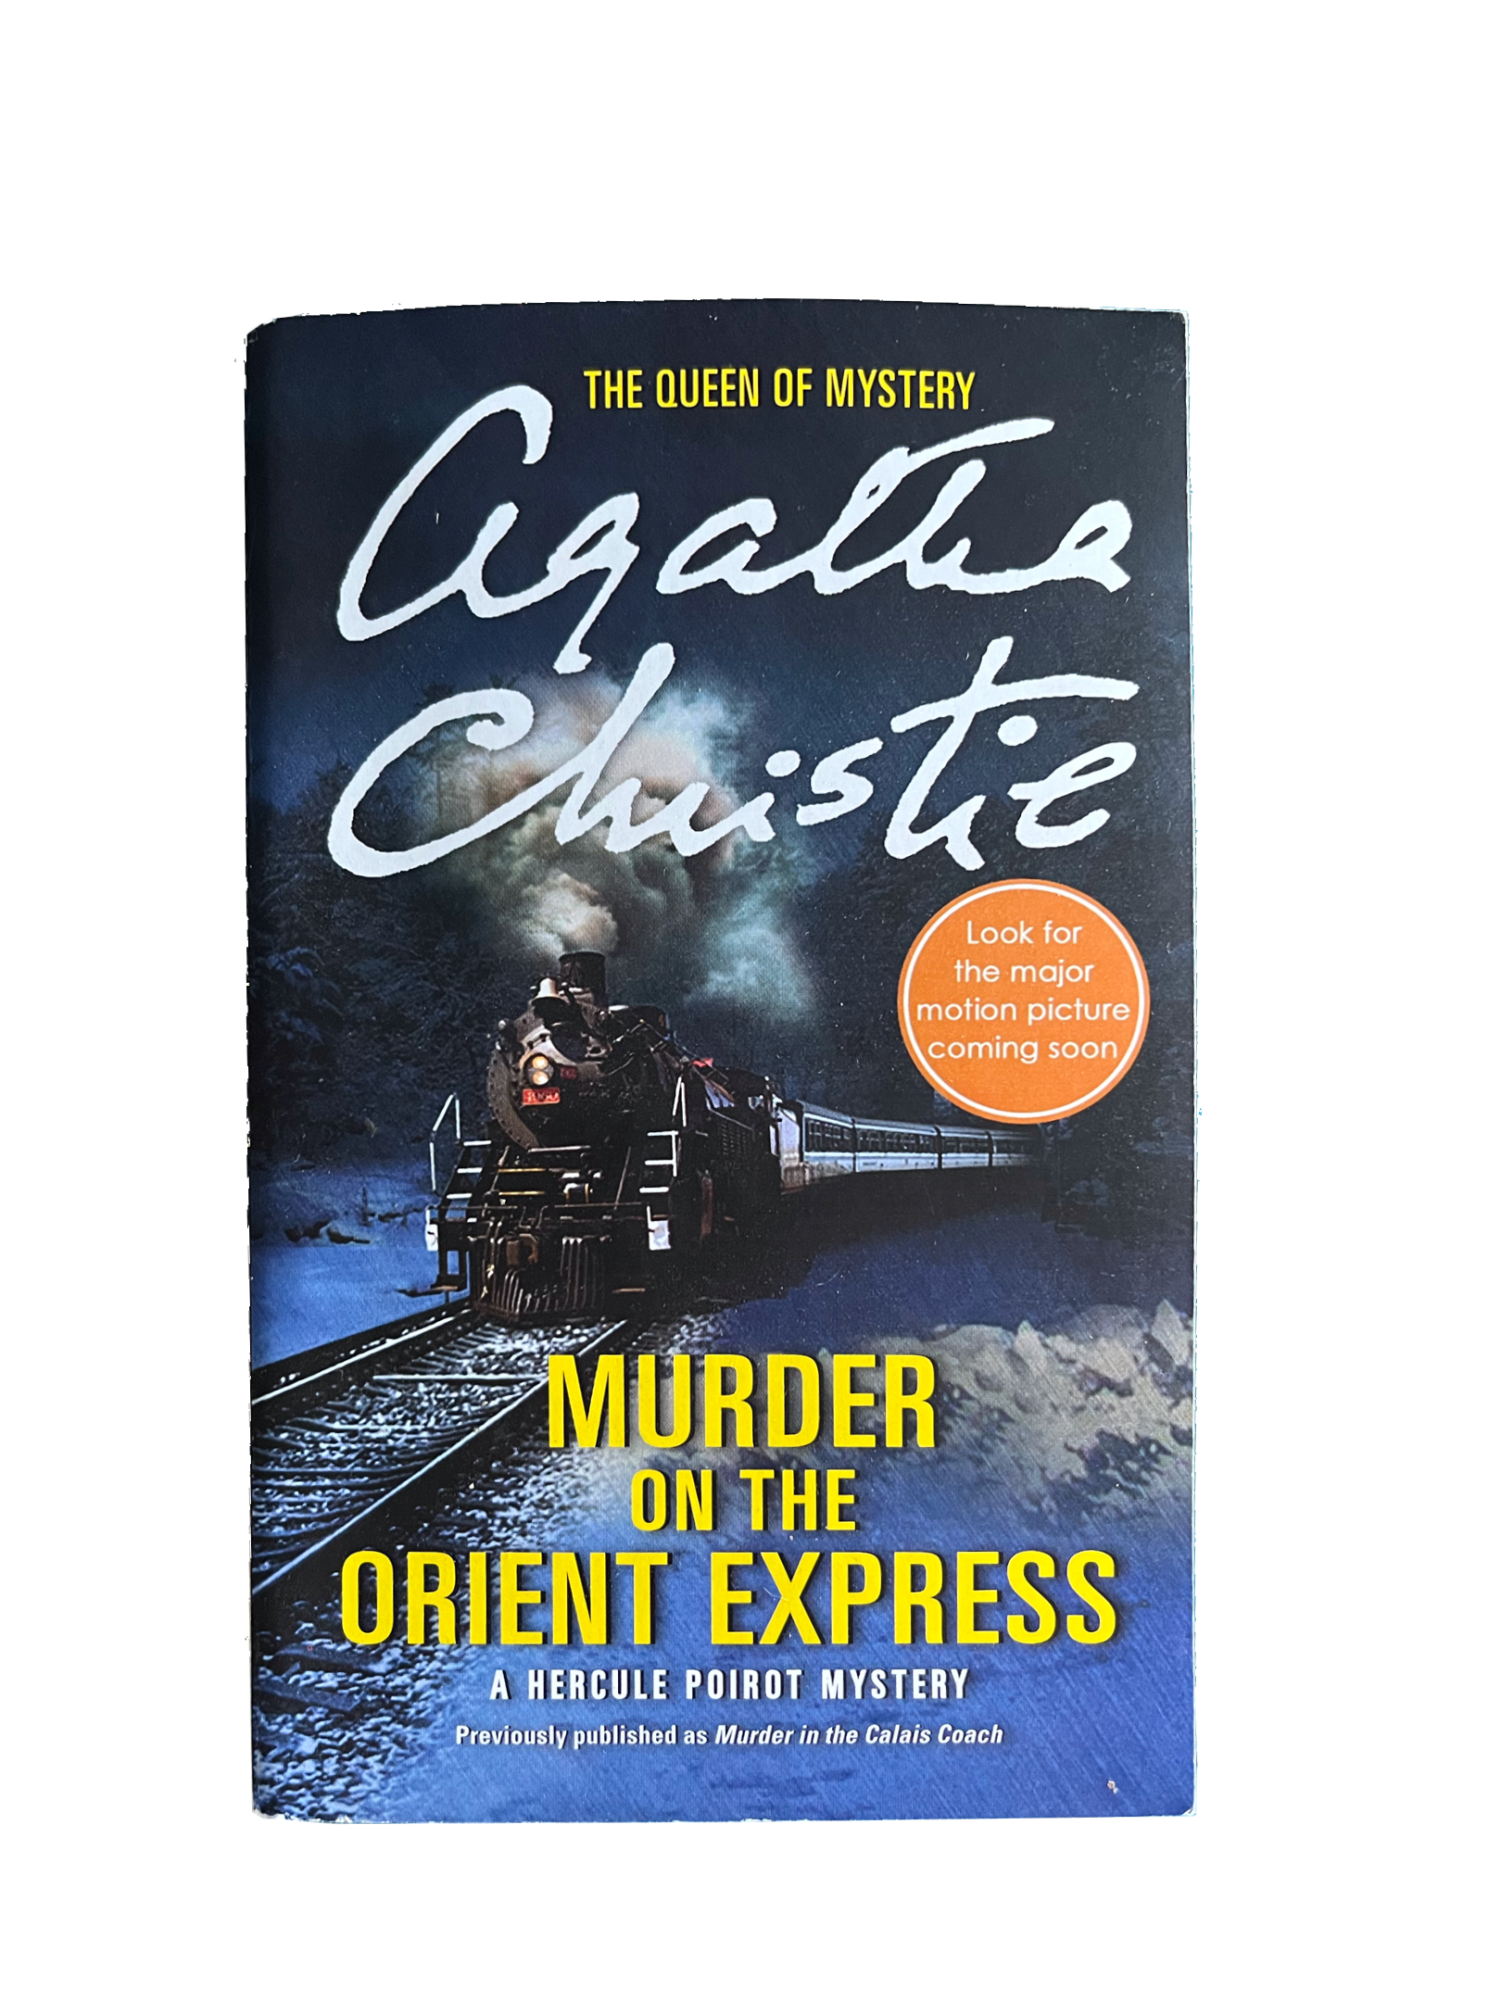 First published in 1934, Murder on the Orient Express has aged like fine wine. The book was recently adapted to a film in 2017.